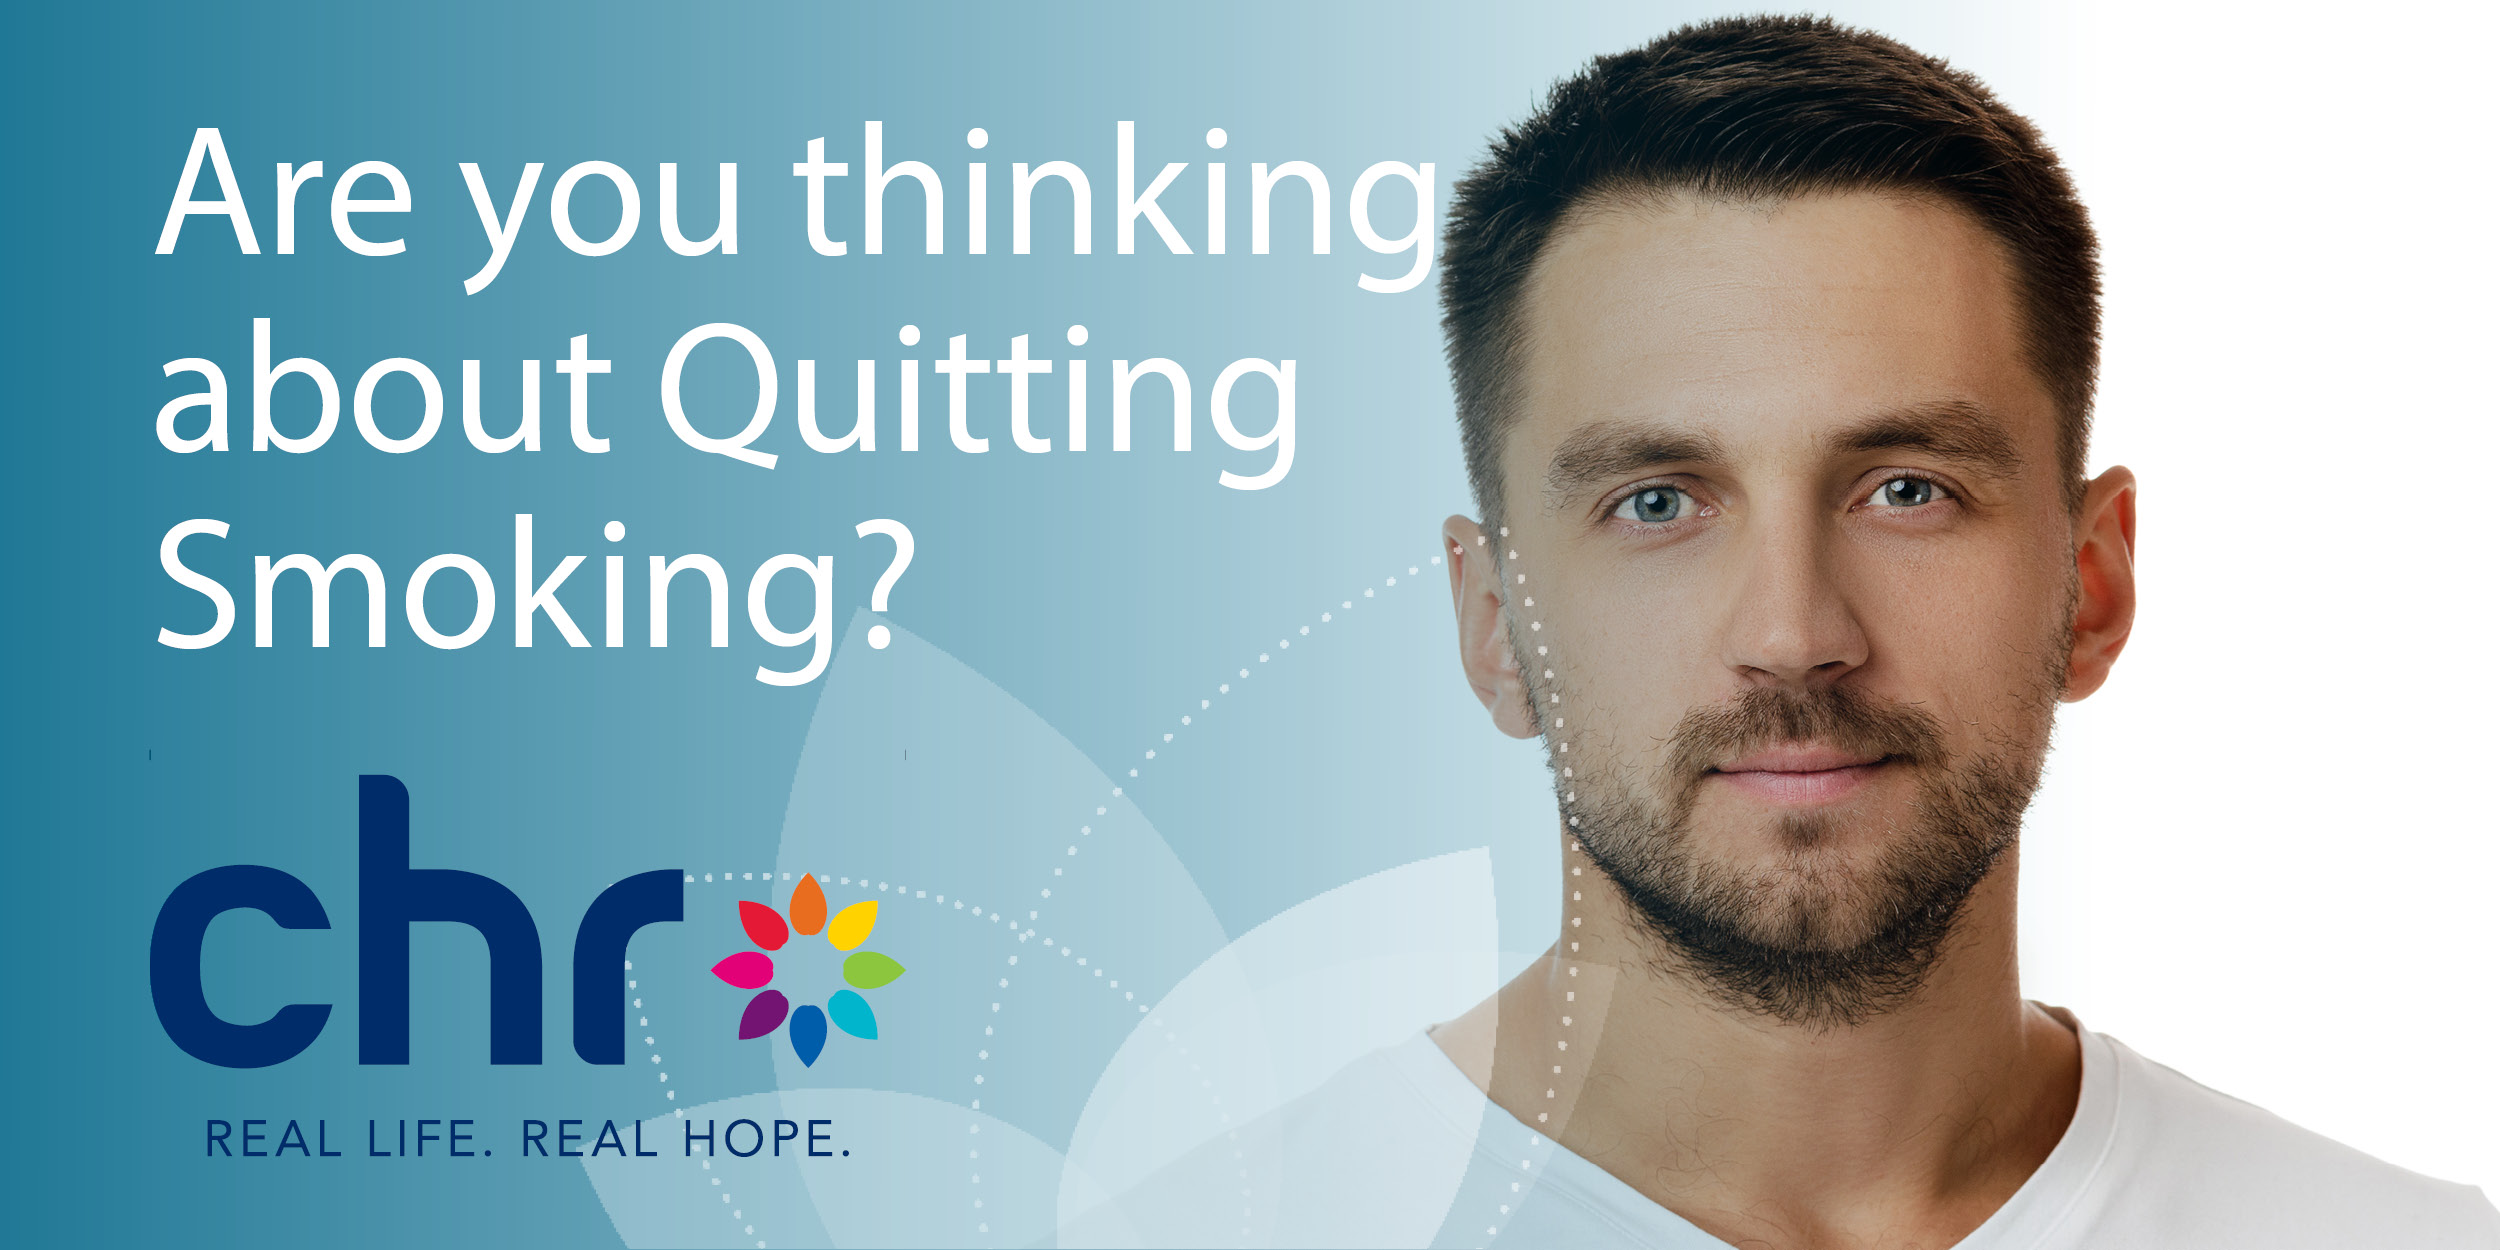 Are you thinking about Quitting Smoking?